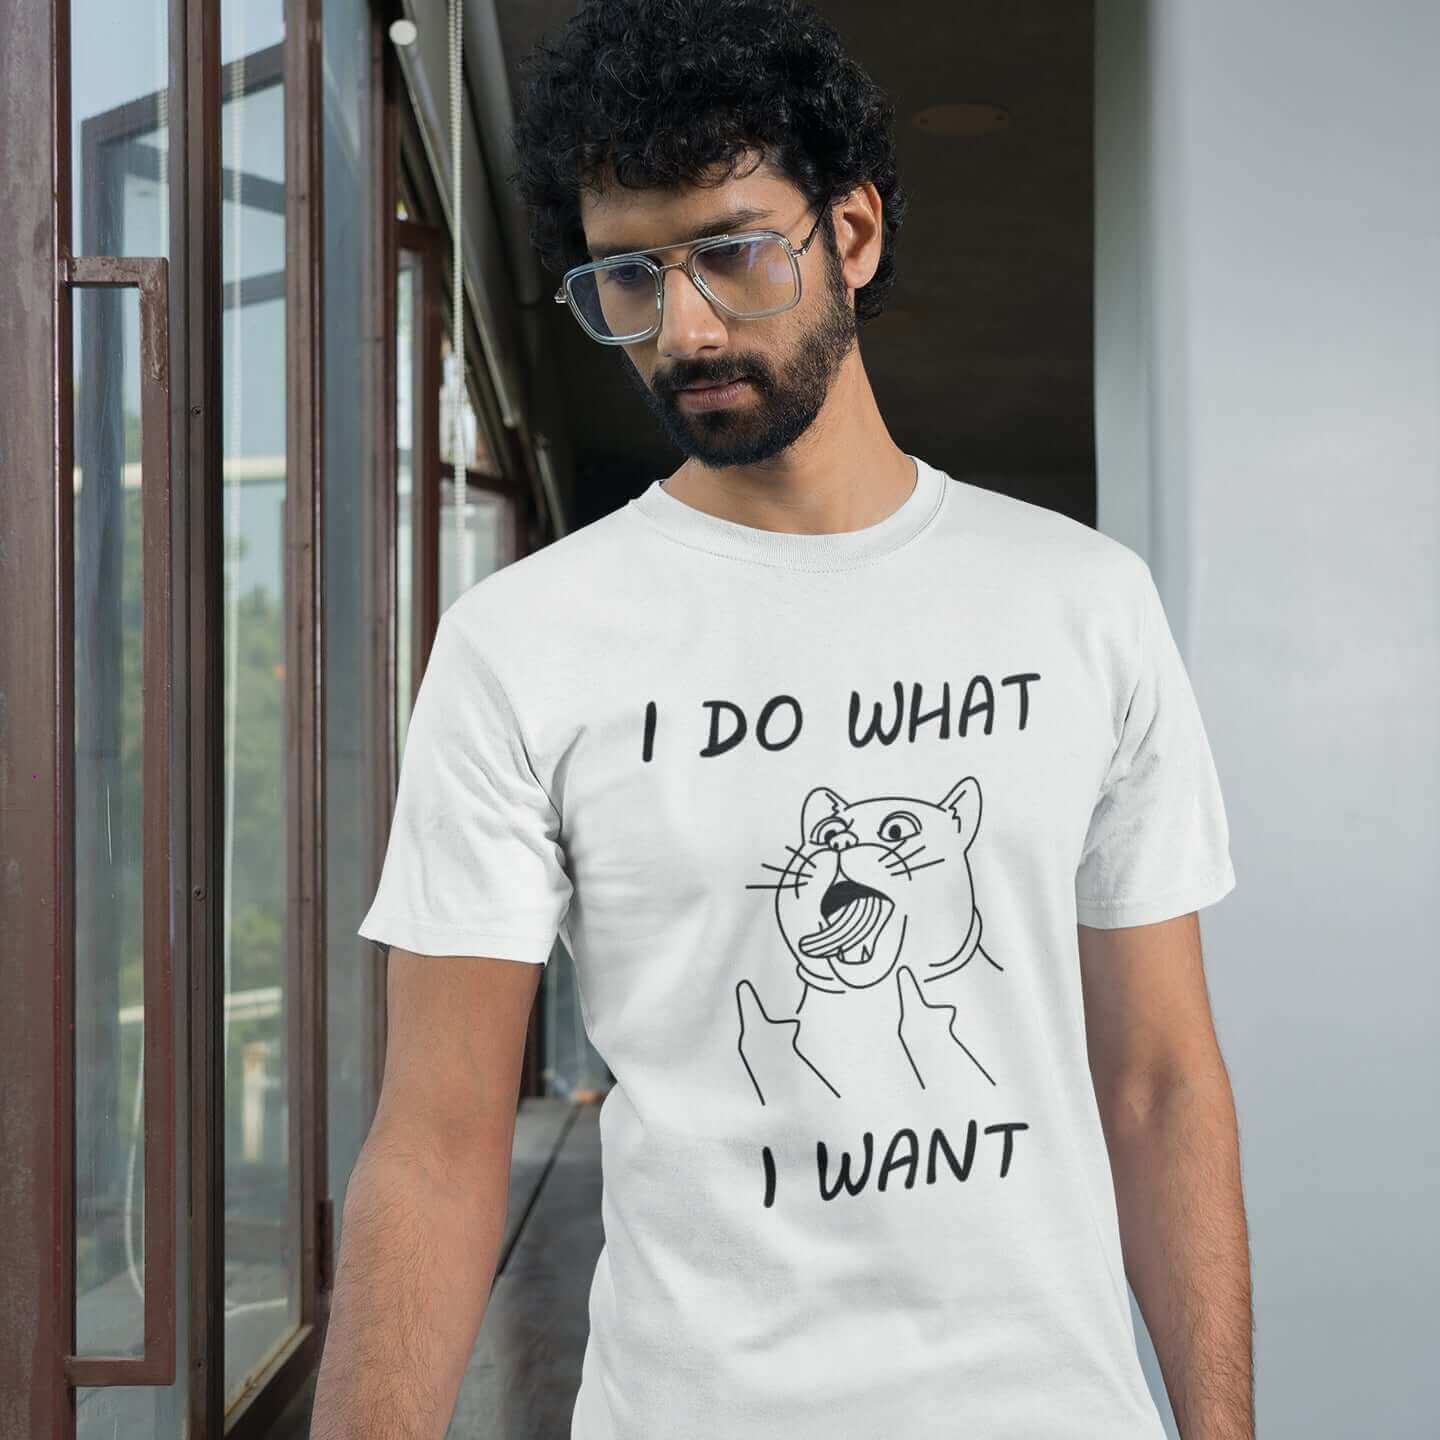 Man wearing white t-shirt with cat flipping middle fingers and the words I do what I want printed on the front.